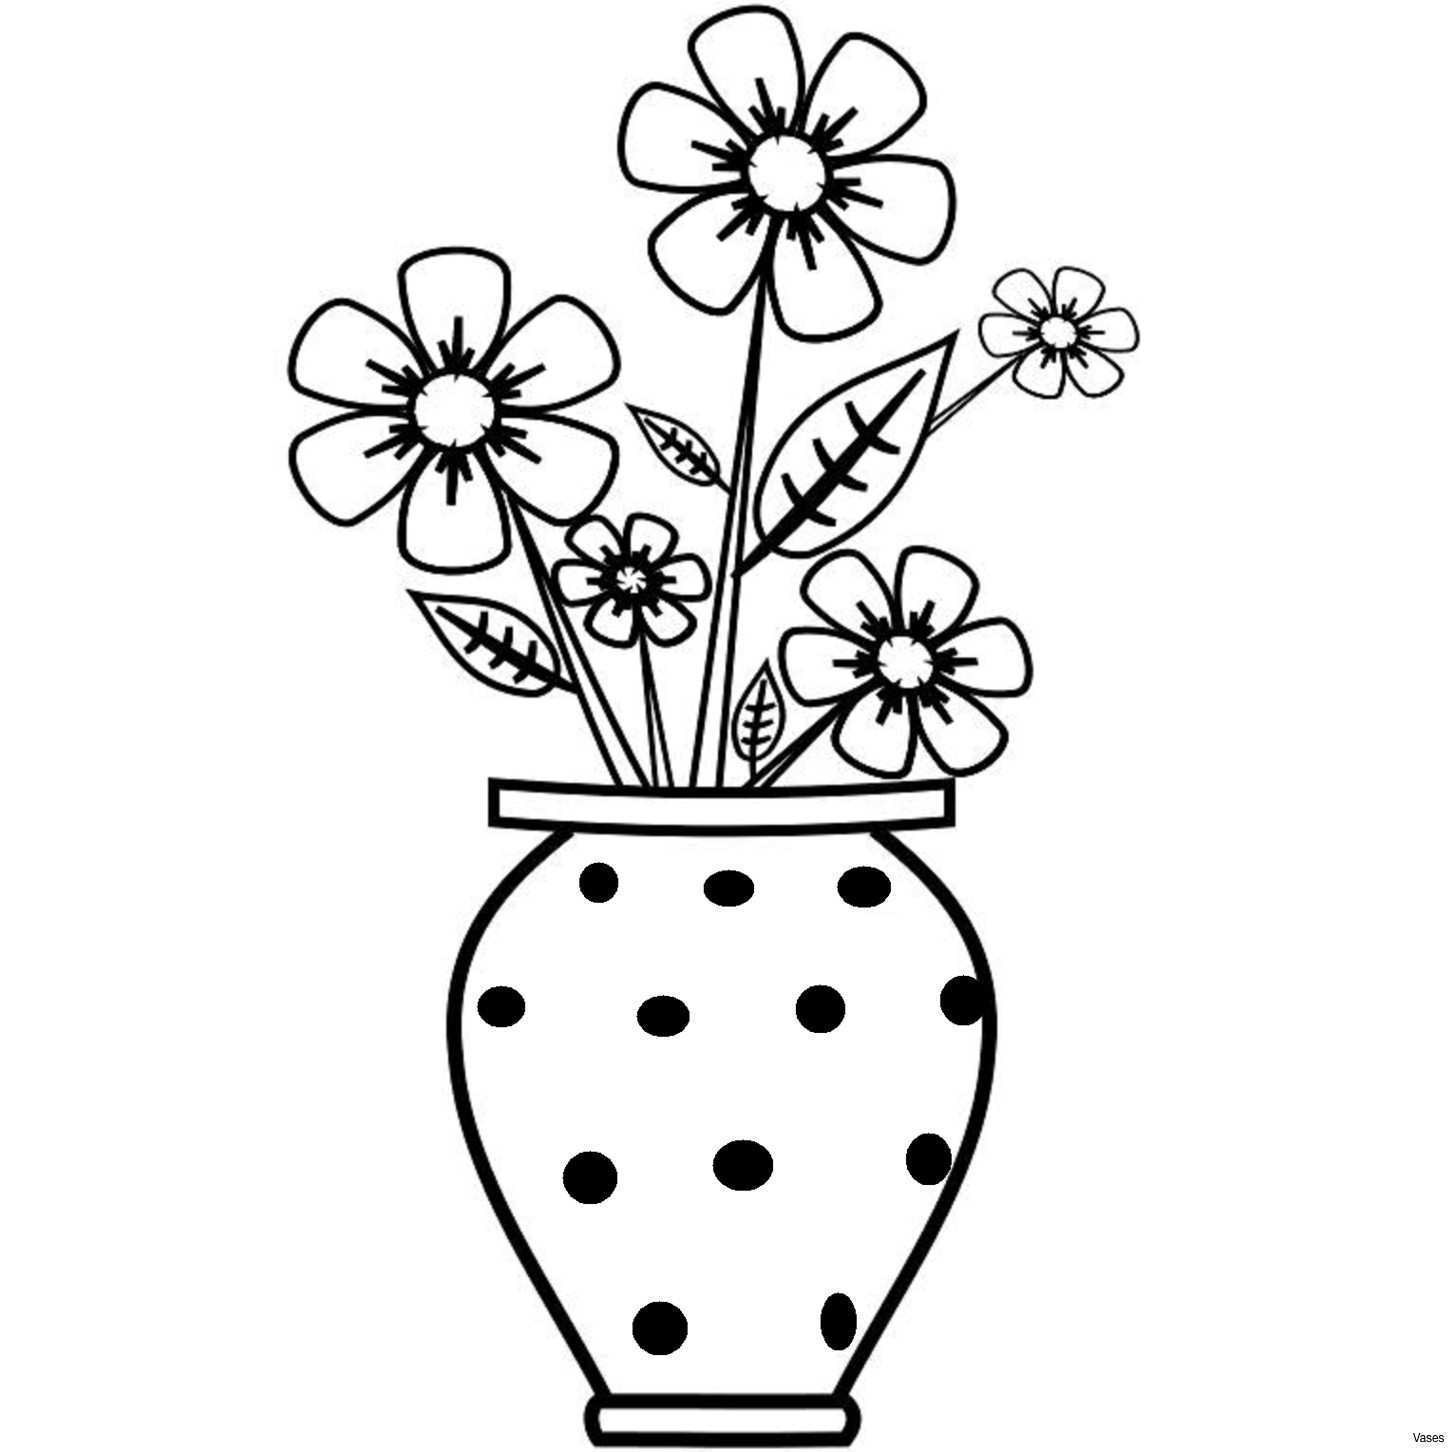 27 Spectacular Flower Vase Ideas 2024 free download flower vase ideas of black and white art inspirational will clipart colored flower vase pertaining to black and white art inspirational will clipart colored flower vase clip arth vases art i